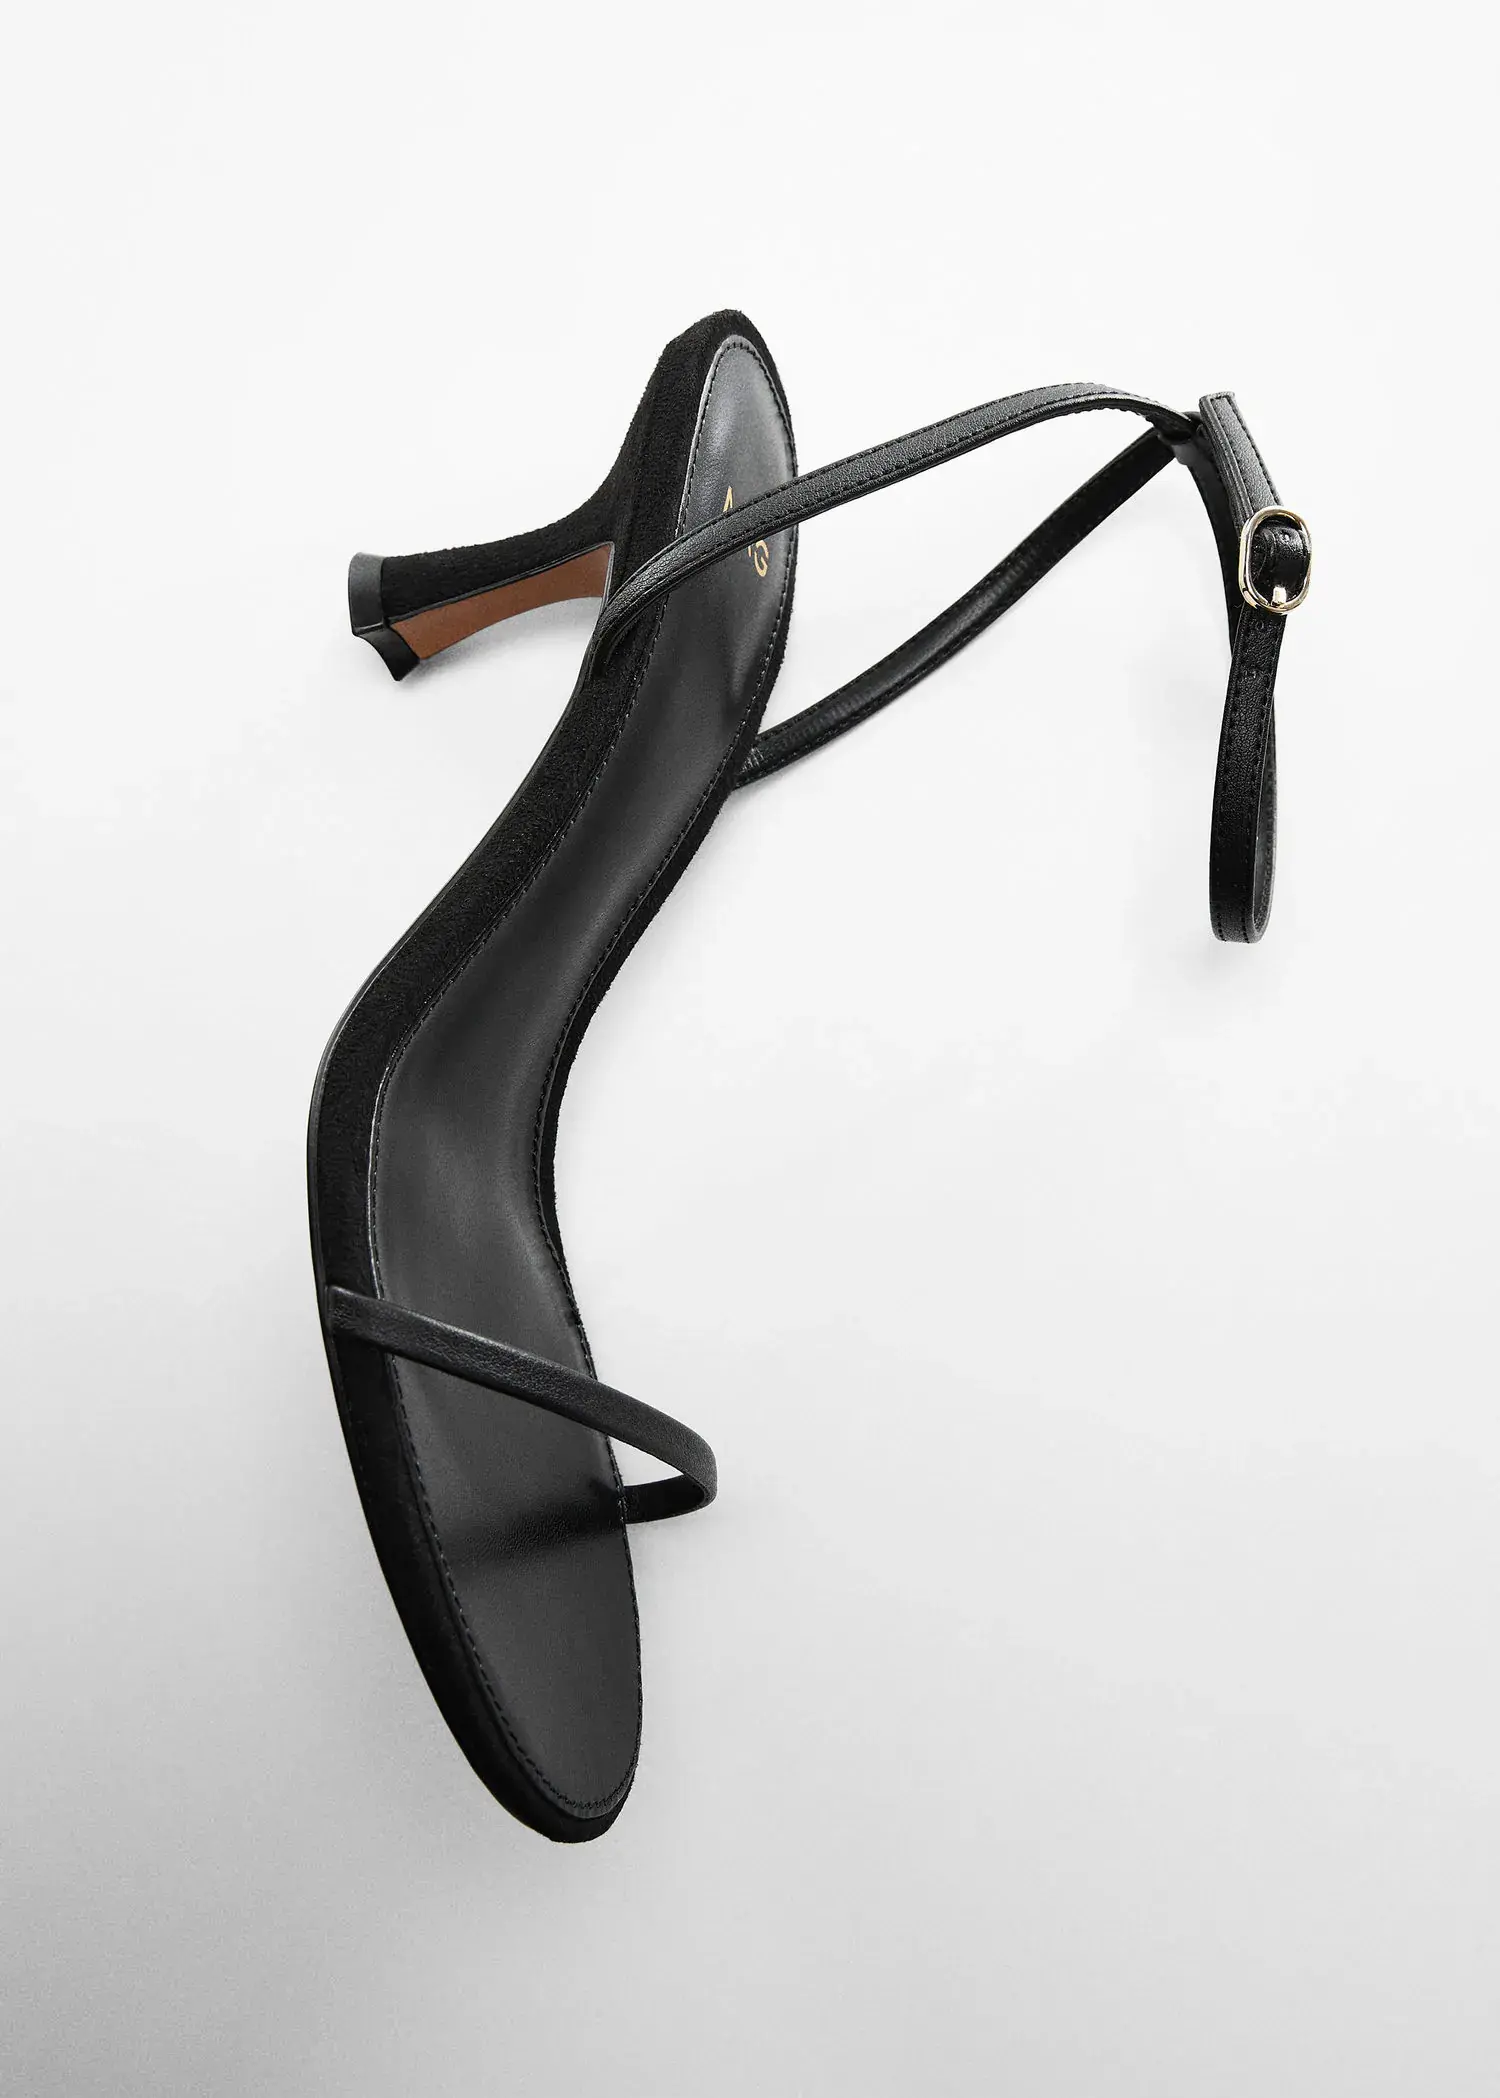 Mango Ankle-cuff heeled sandals. a pair of black high heeled sandals on a white surface. 